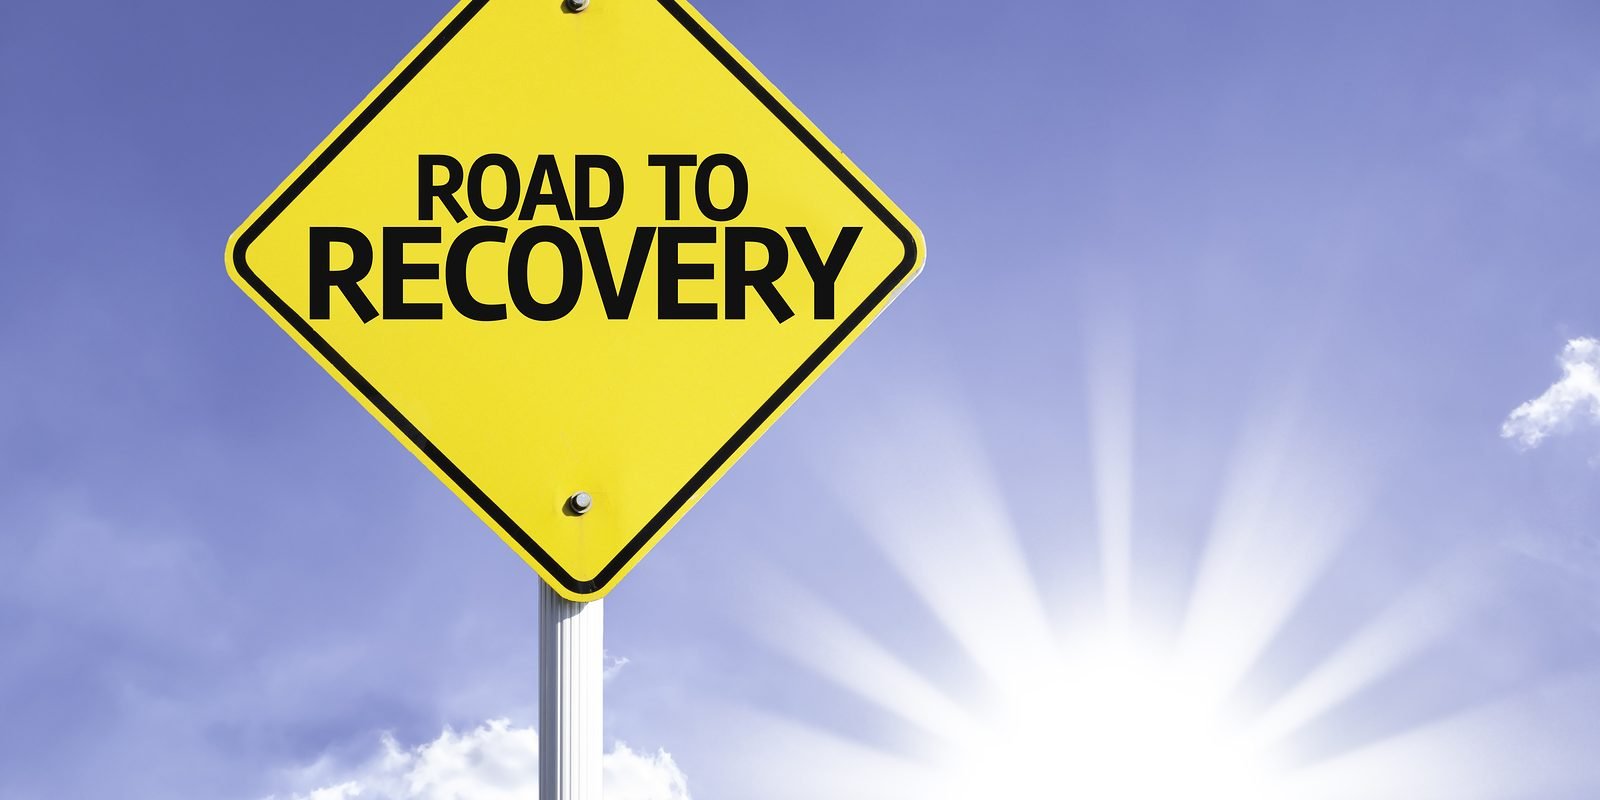 Road To Recovery road sign with sun background for suboxone rehab